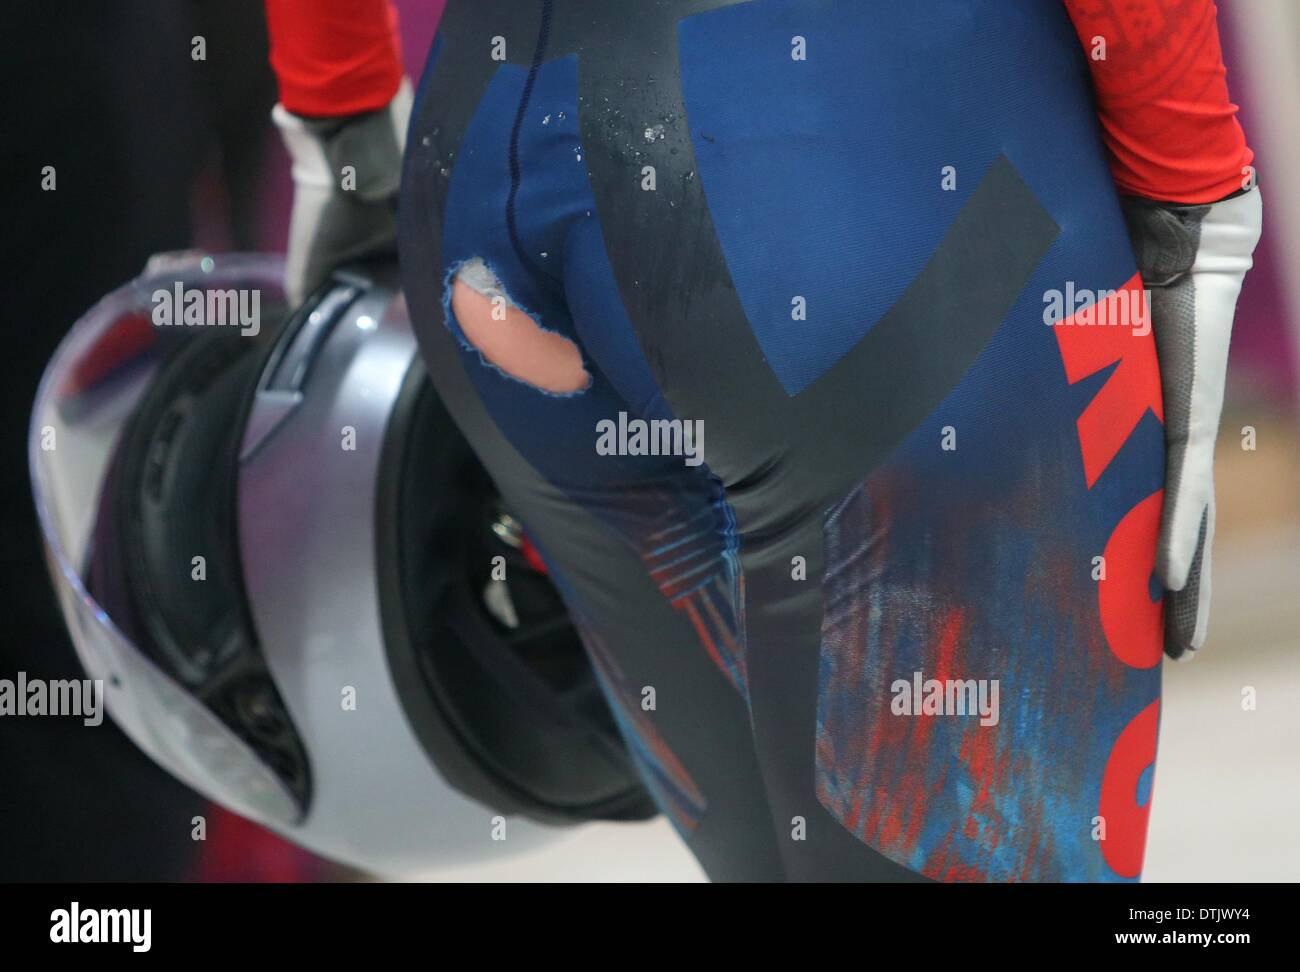 Sochi, Russia. 19th February 2014. Nadezhda Sergeeva of Russia after the  third run of the Women's Bobsleigh competition at the Sanki Sliding Center  at the Sochi 2014 Olympic Games, Krasnaya Polyana, Russia,